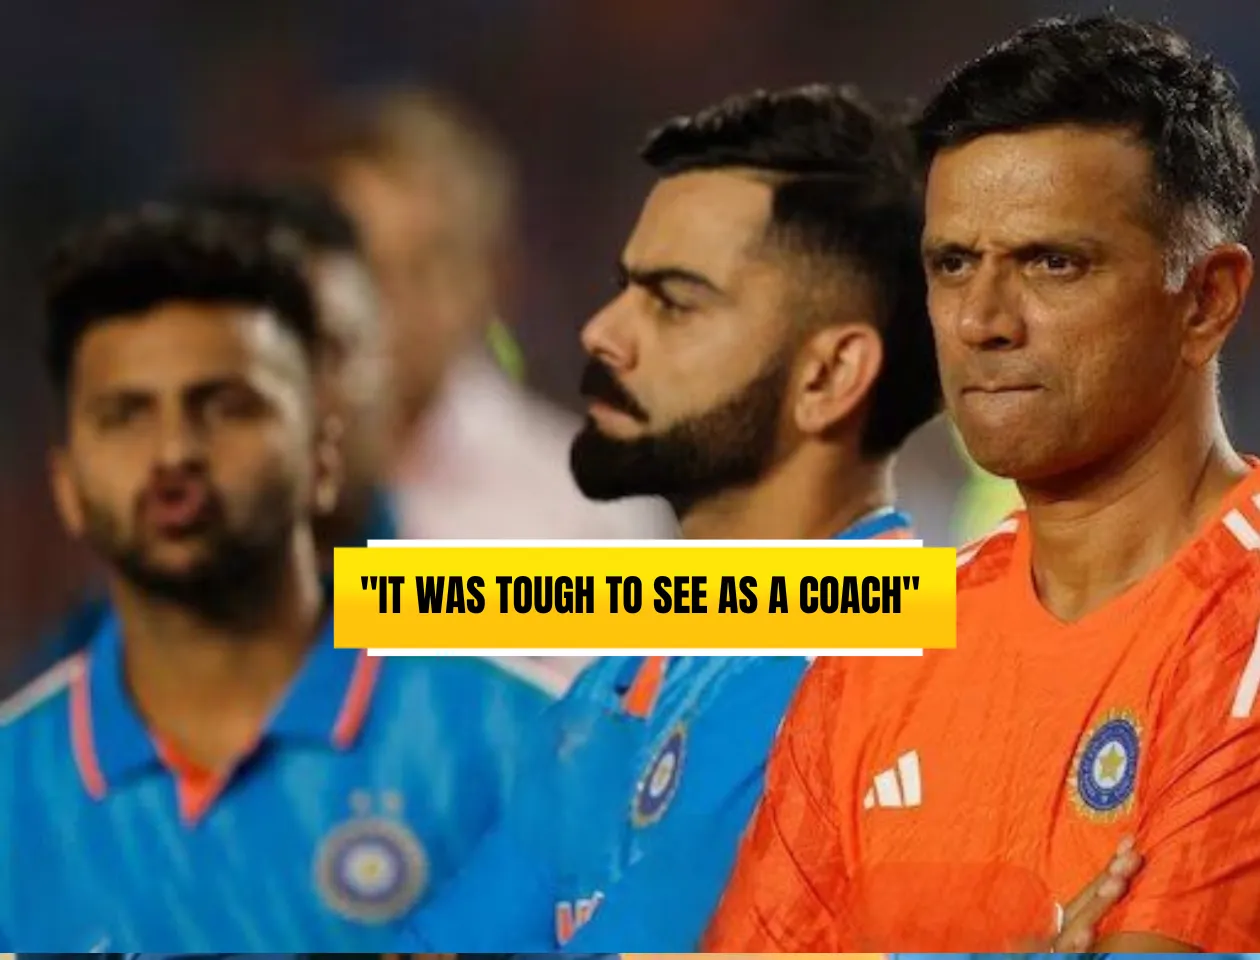 India head coach Rahul Dravid reflects on emotionally crashed dressing room scenes after World Cup final loss